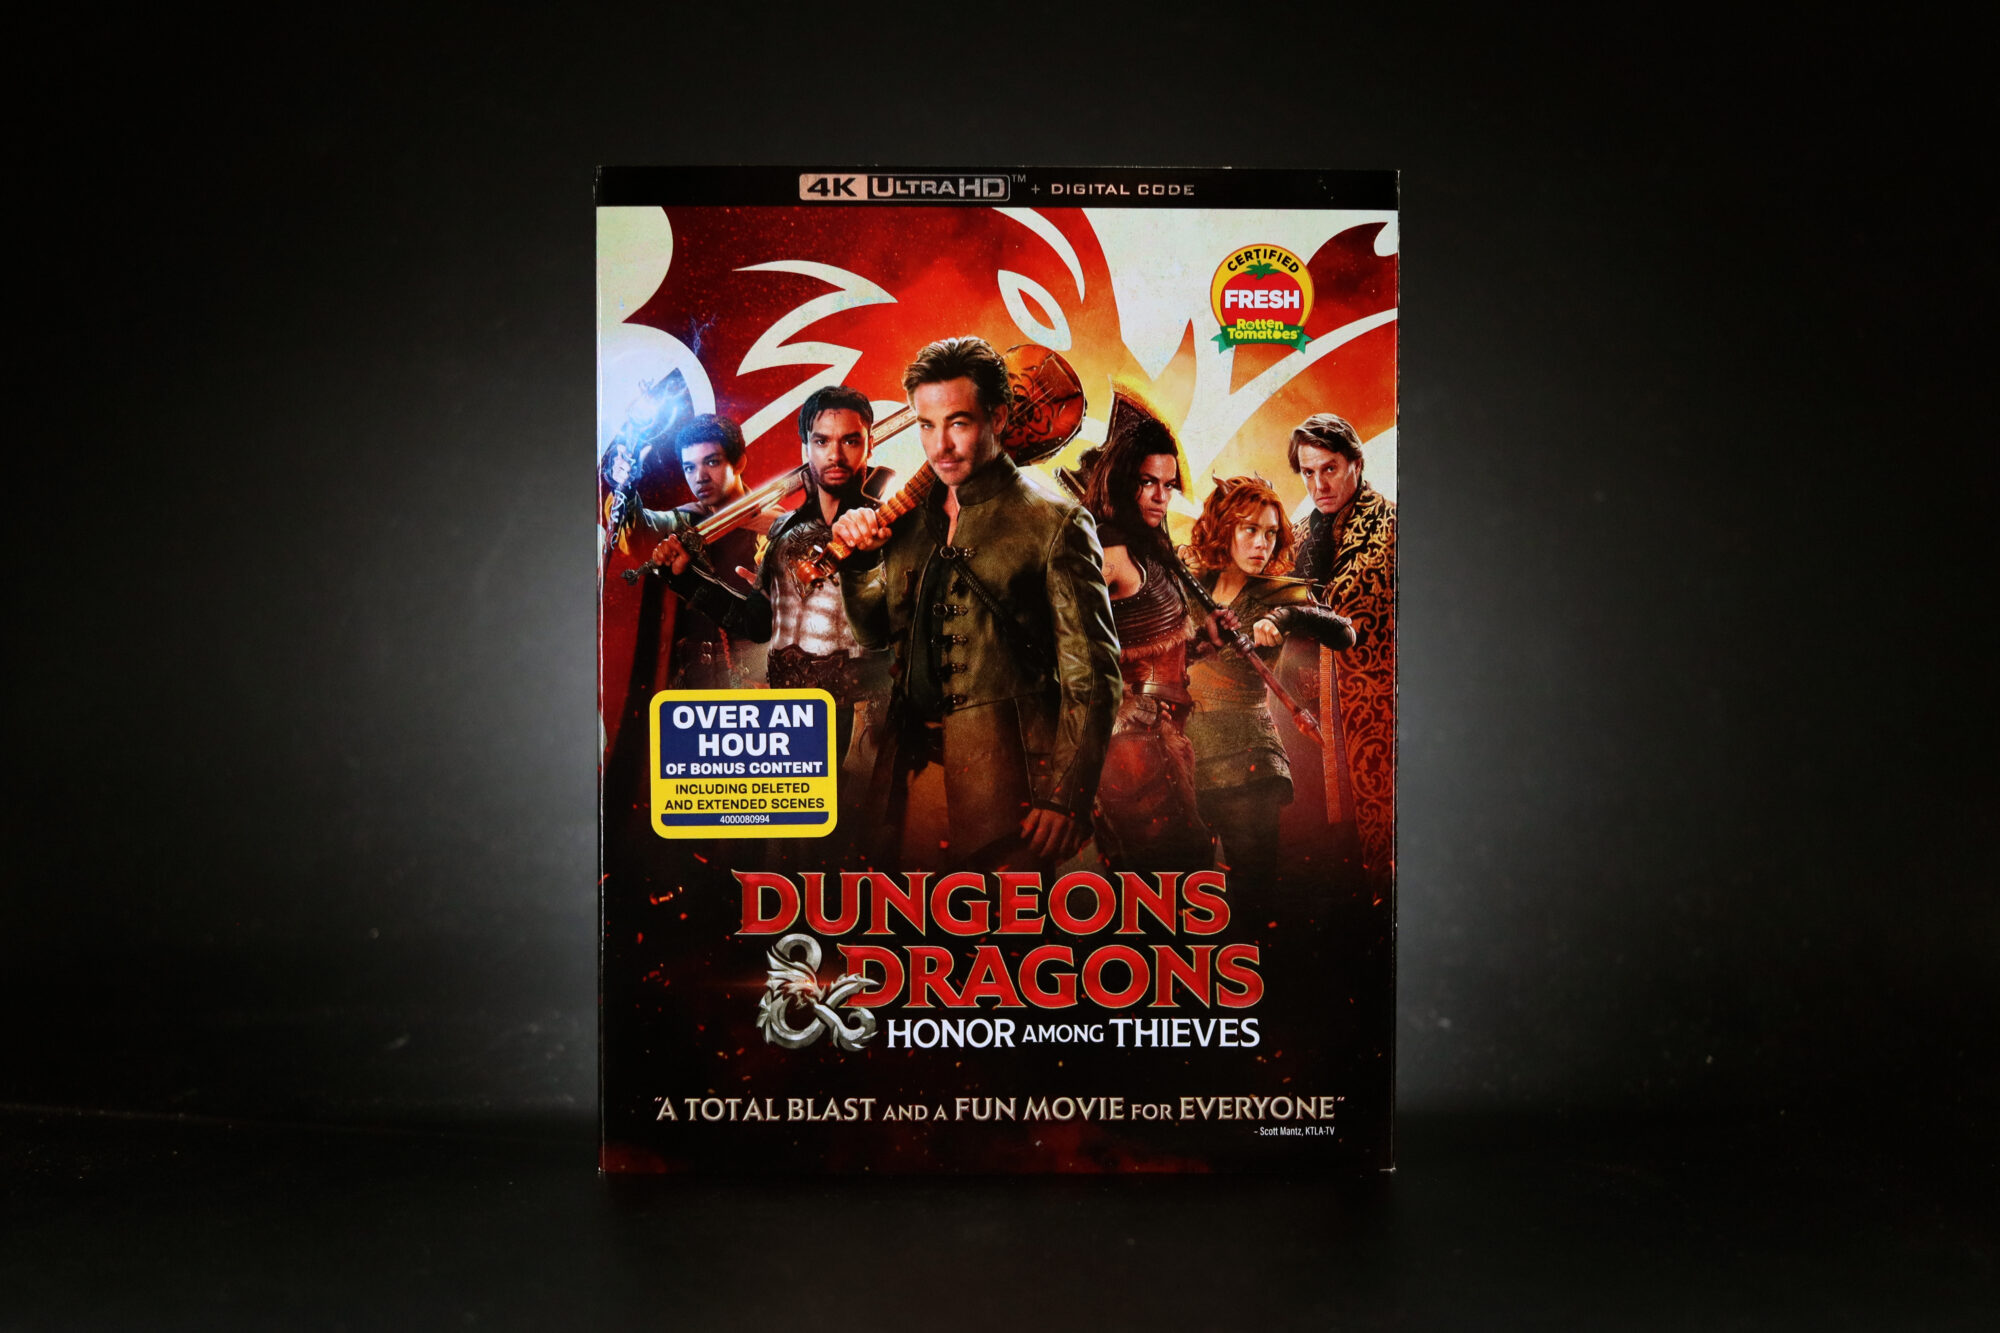 Dungeons & Dragons: Honor Among Thieves Home Media